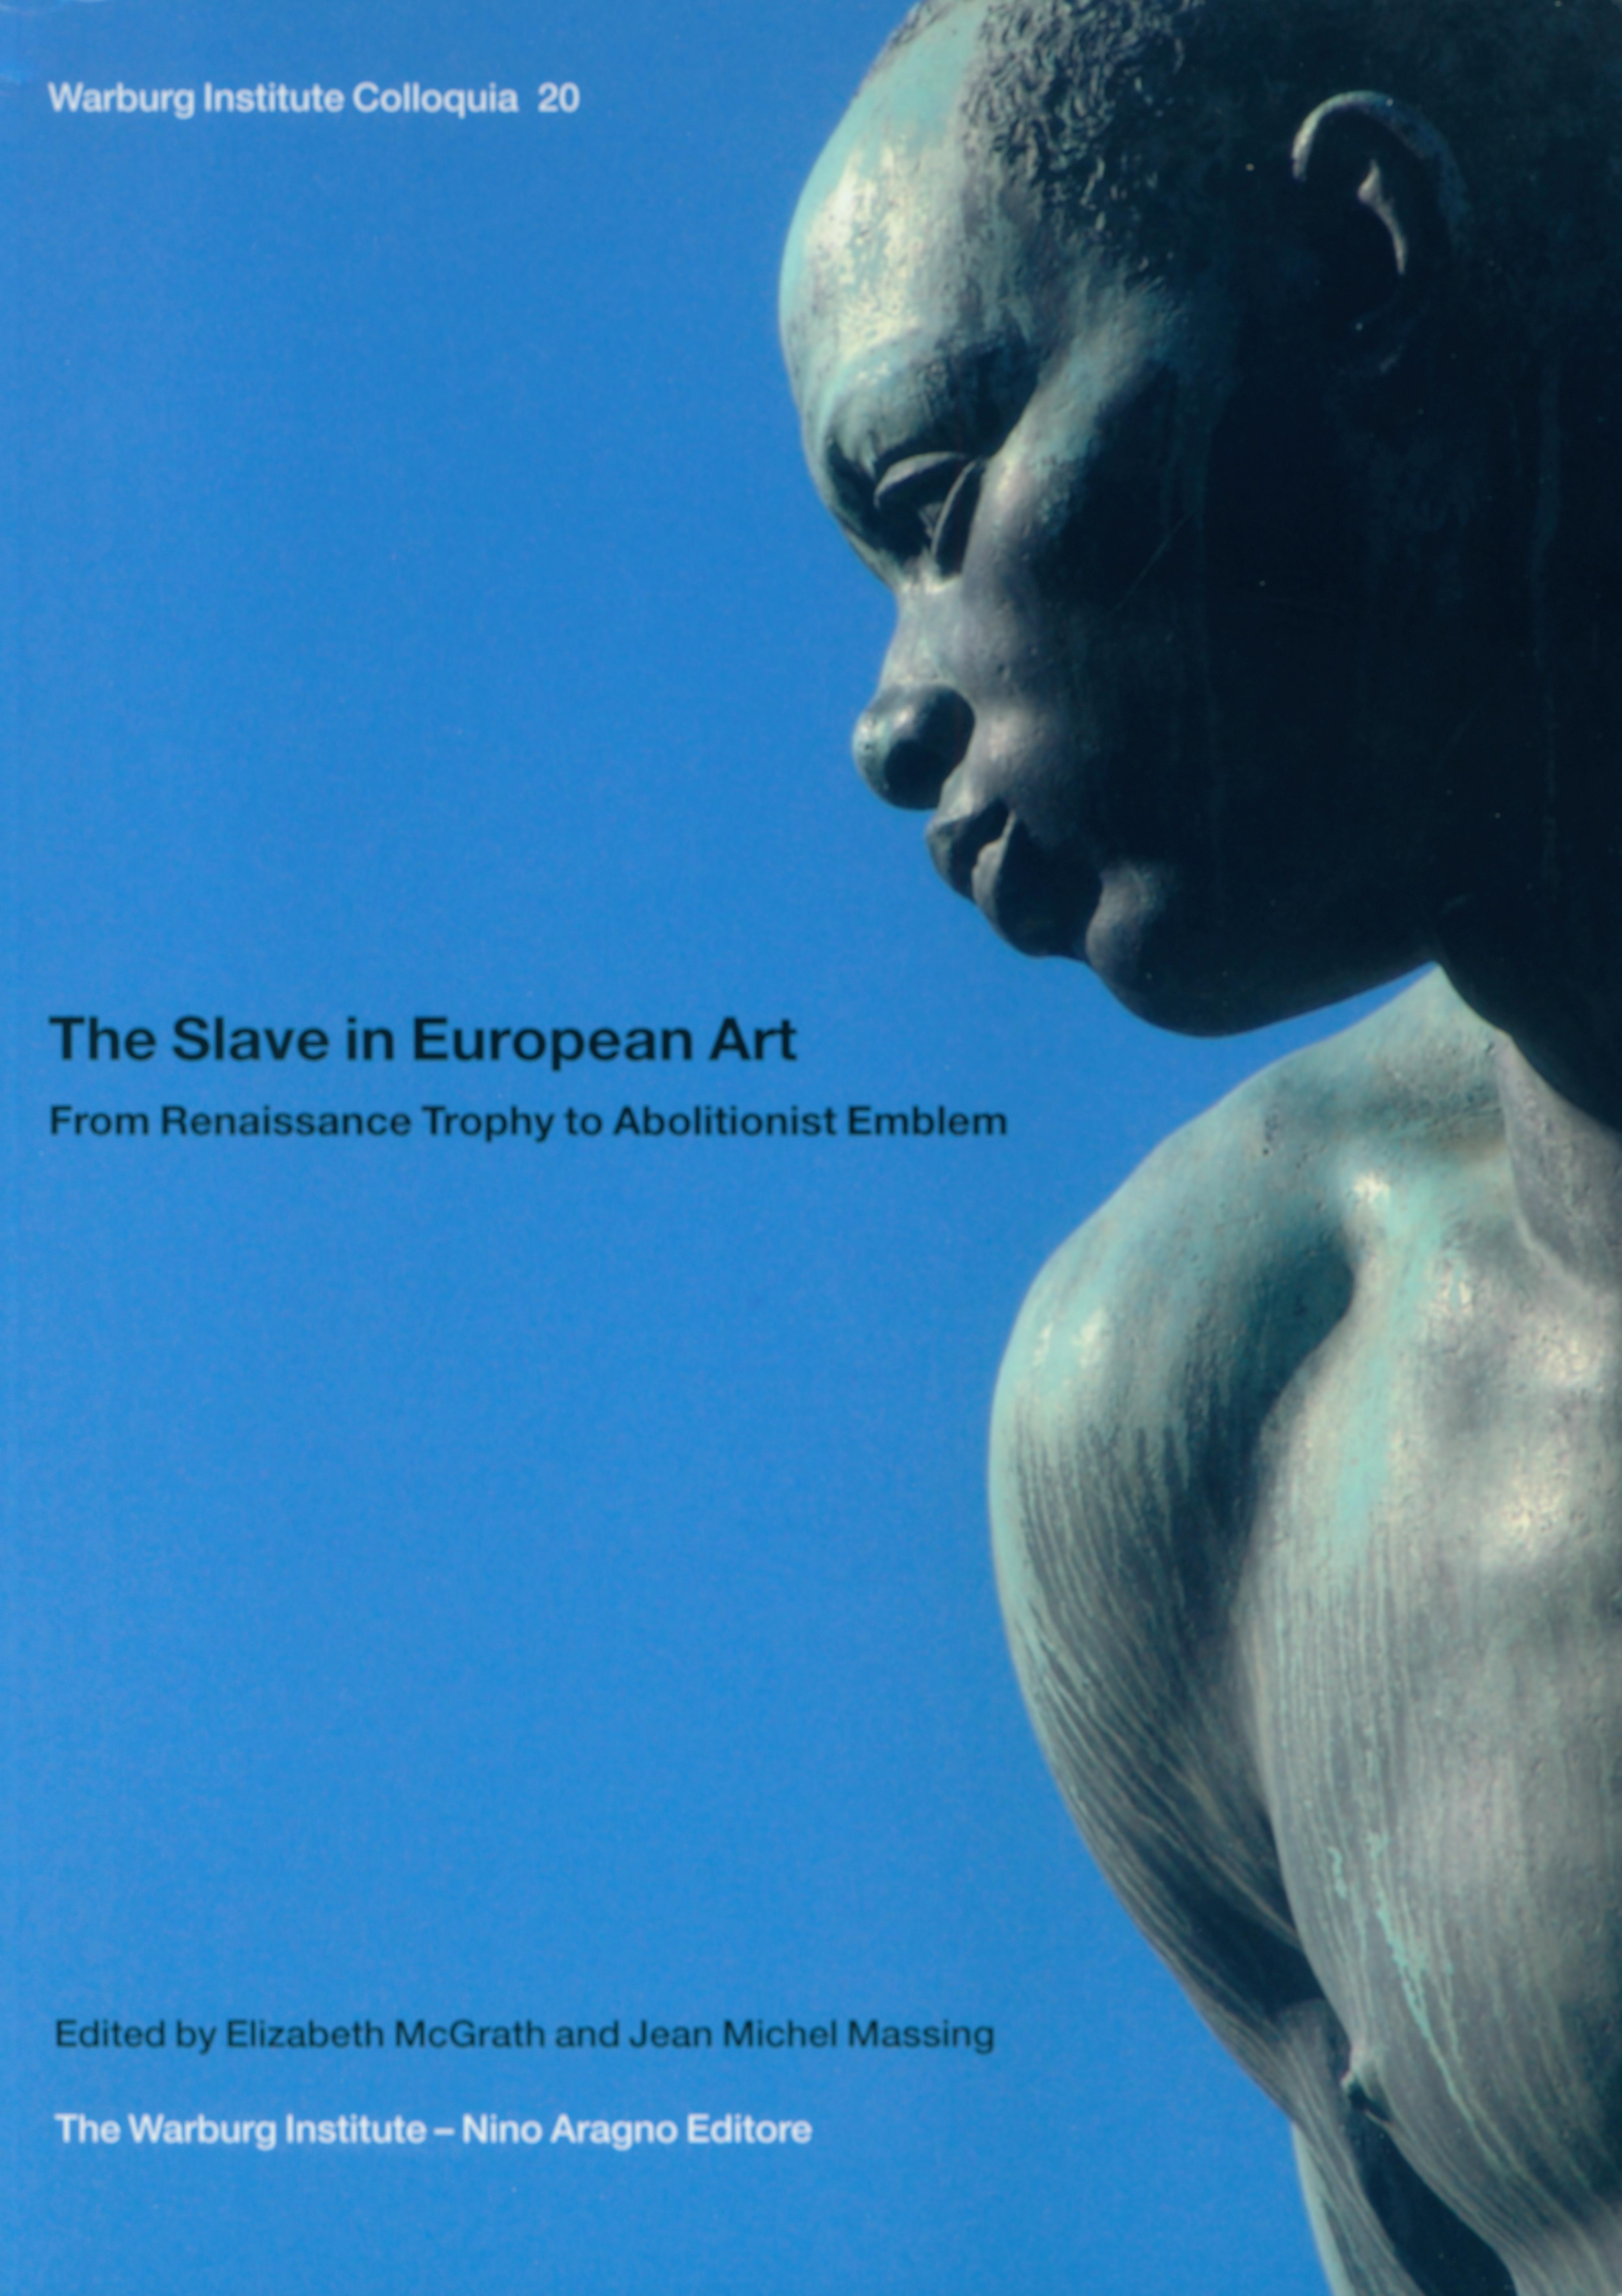 Professor Jean Michel Massing has co-edited a new book entitled 'The Slave in European Art: From Renaissance Trophy to Abolitionist Emblem'